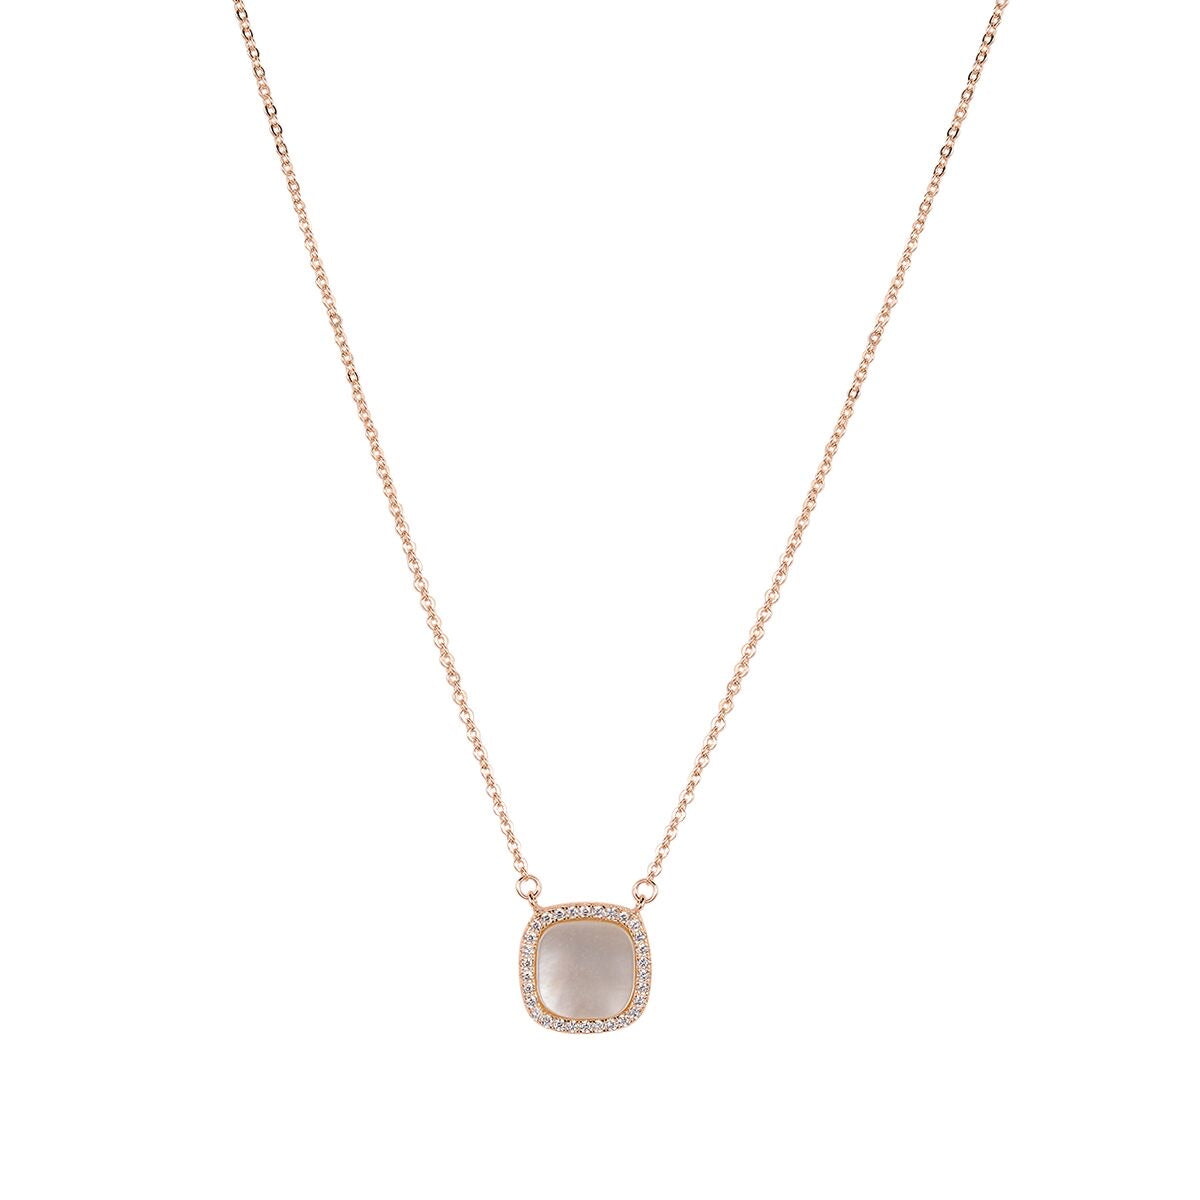 LUX MOTHER OF PEARL NECKLACE